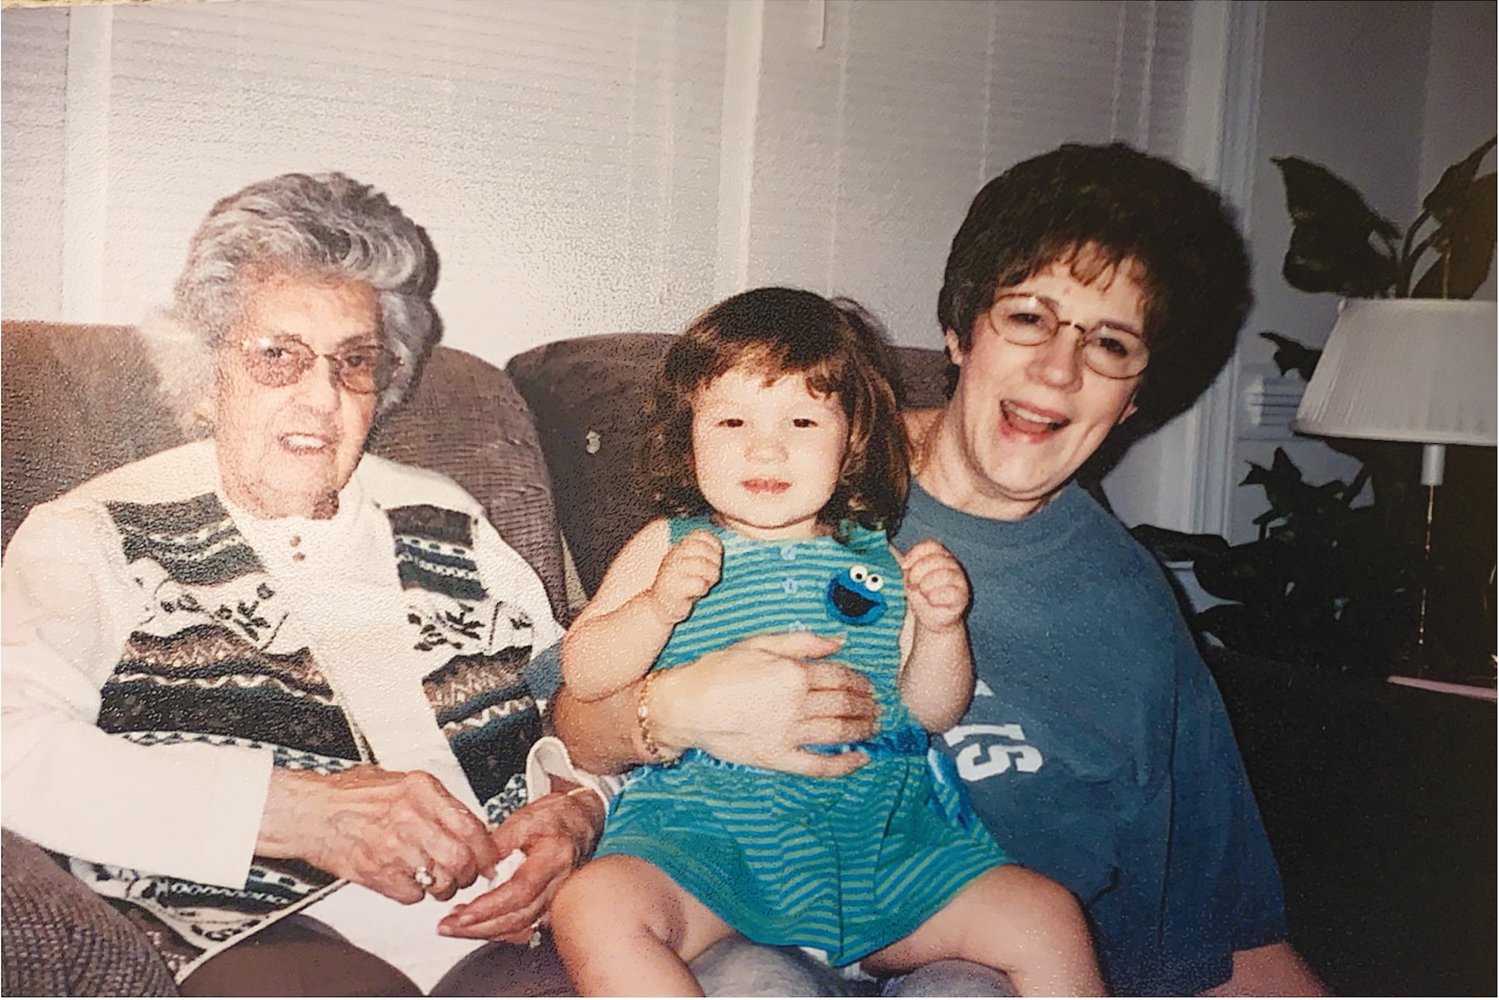 Taylor Heeden (middle) sitting with her great-grandmother (left) and her grandmother (right).